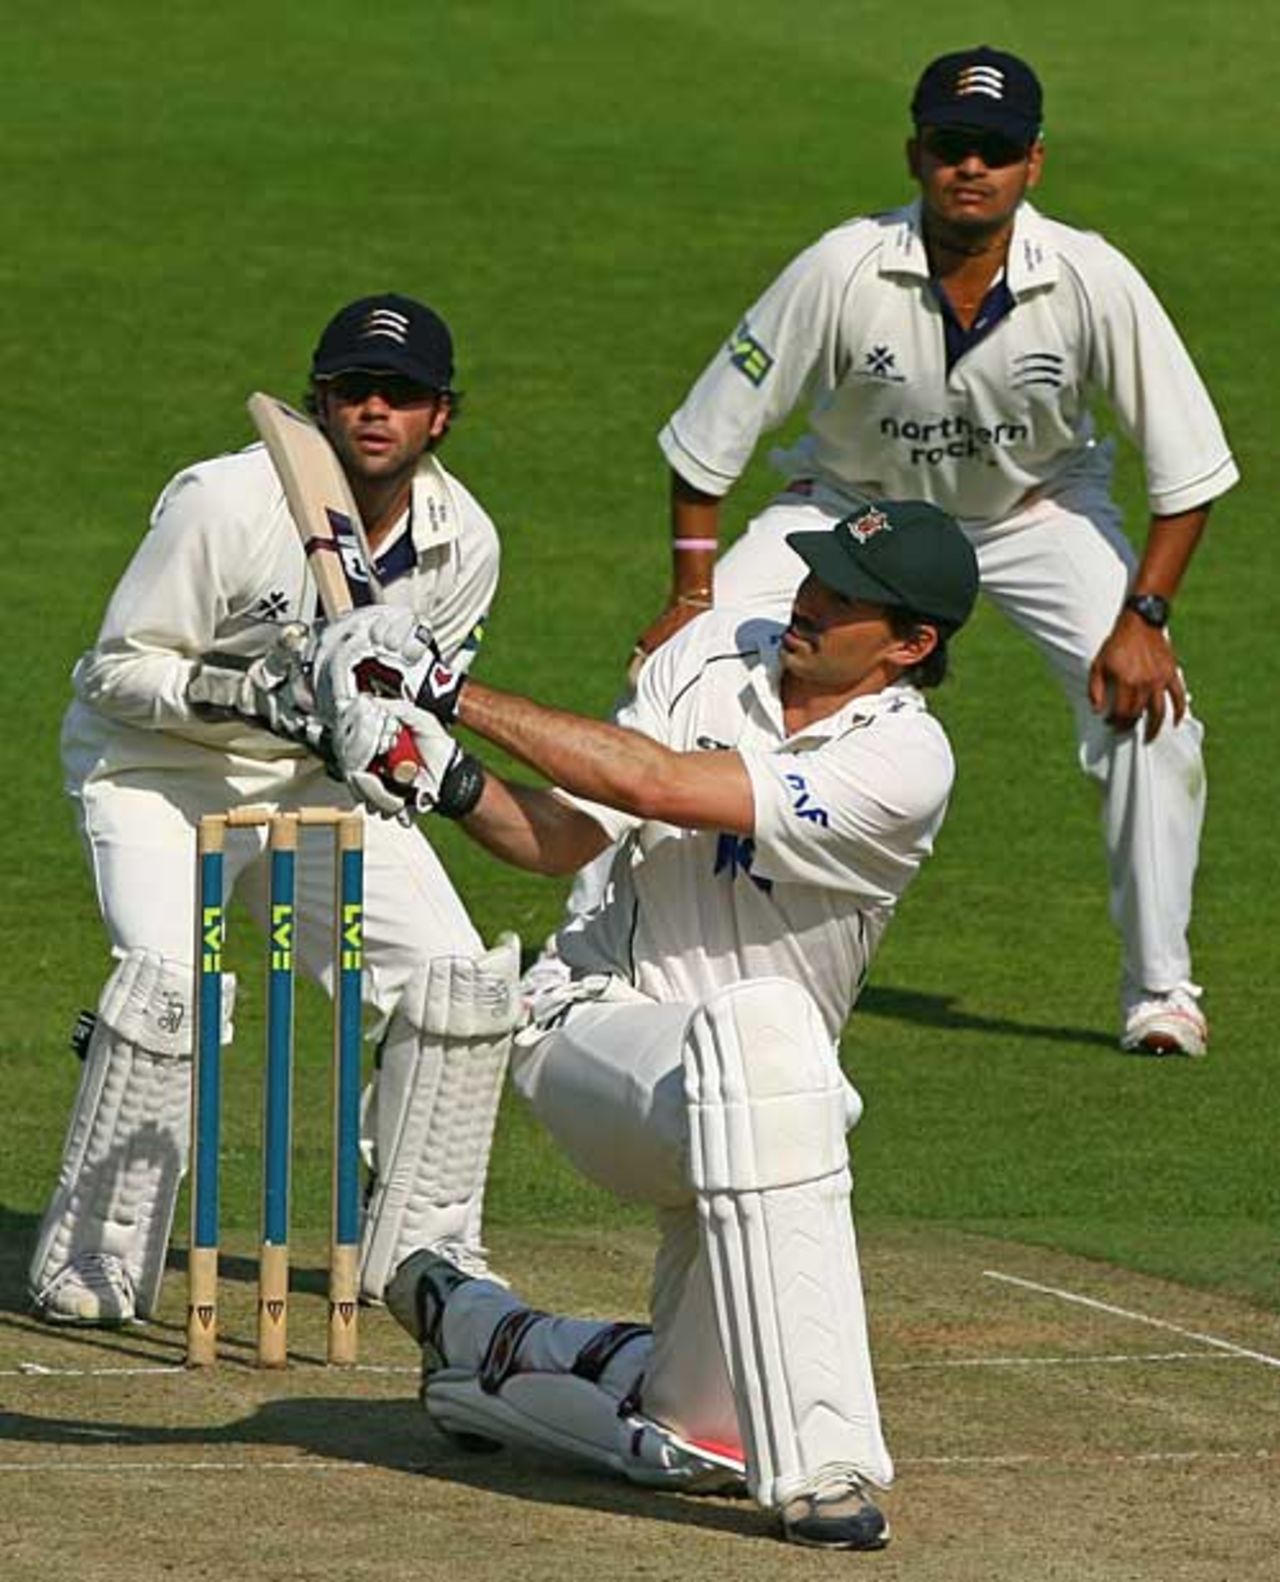 Stephen Fleming sweeps during his century, Middlesex v Nottinghamshire, County Championship, Lord's, August 29, 2007